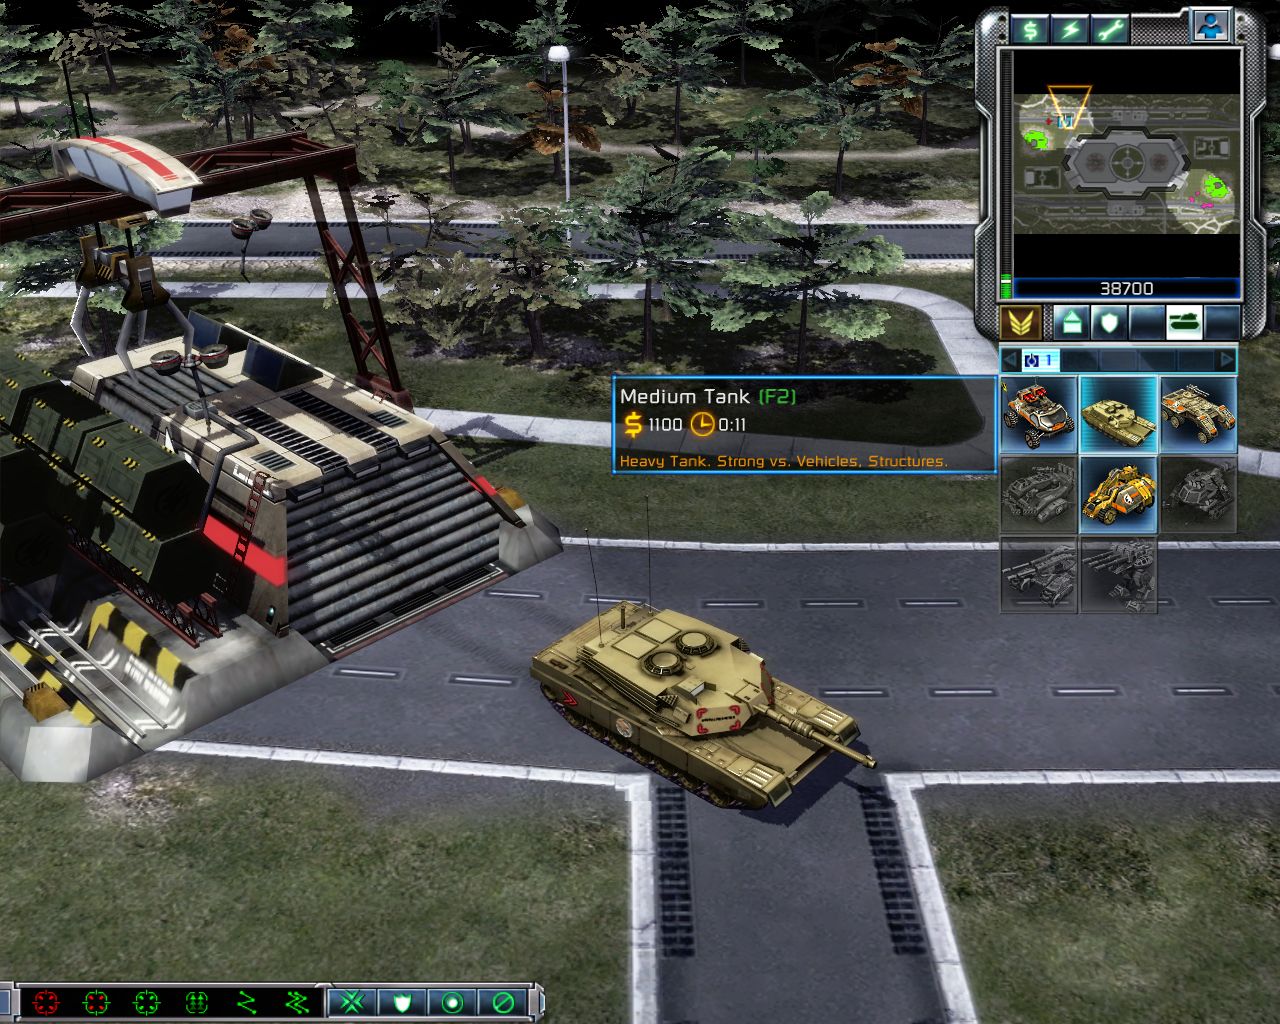 command and conquer 3 patch